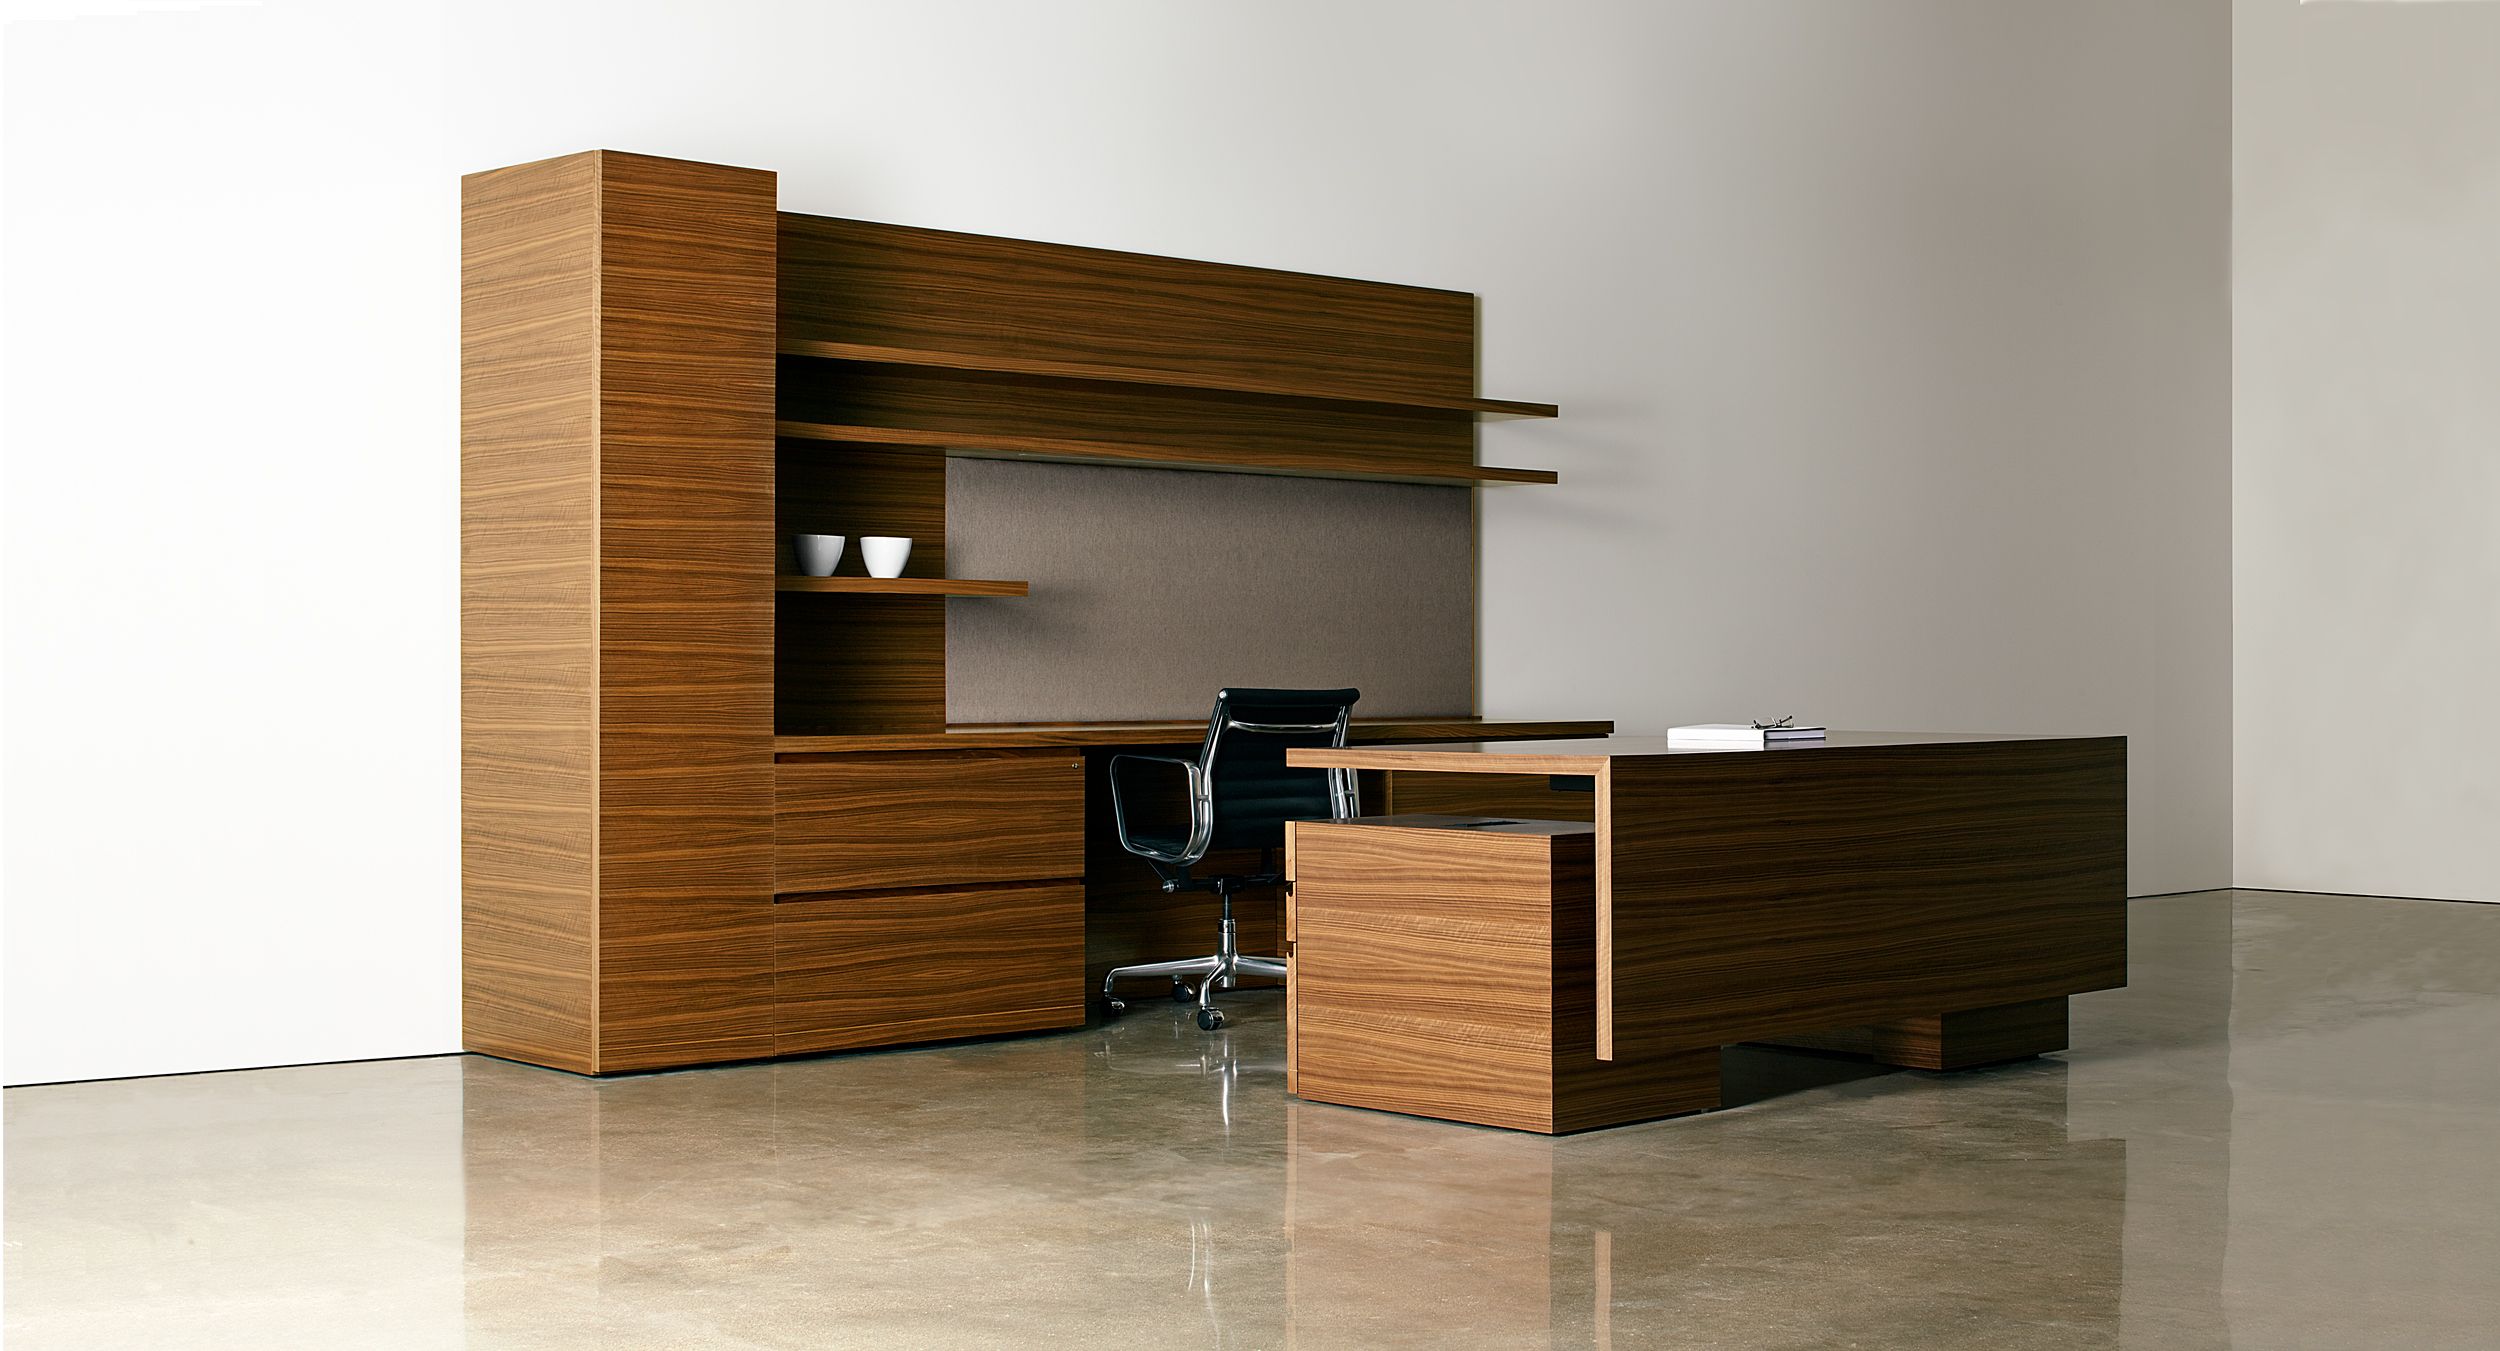 New Millennia offers the first beautifully proportioned adjustable-height wood desk.